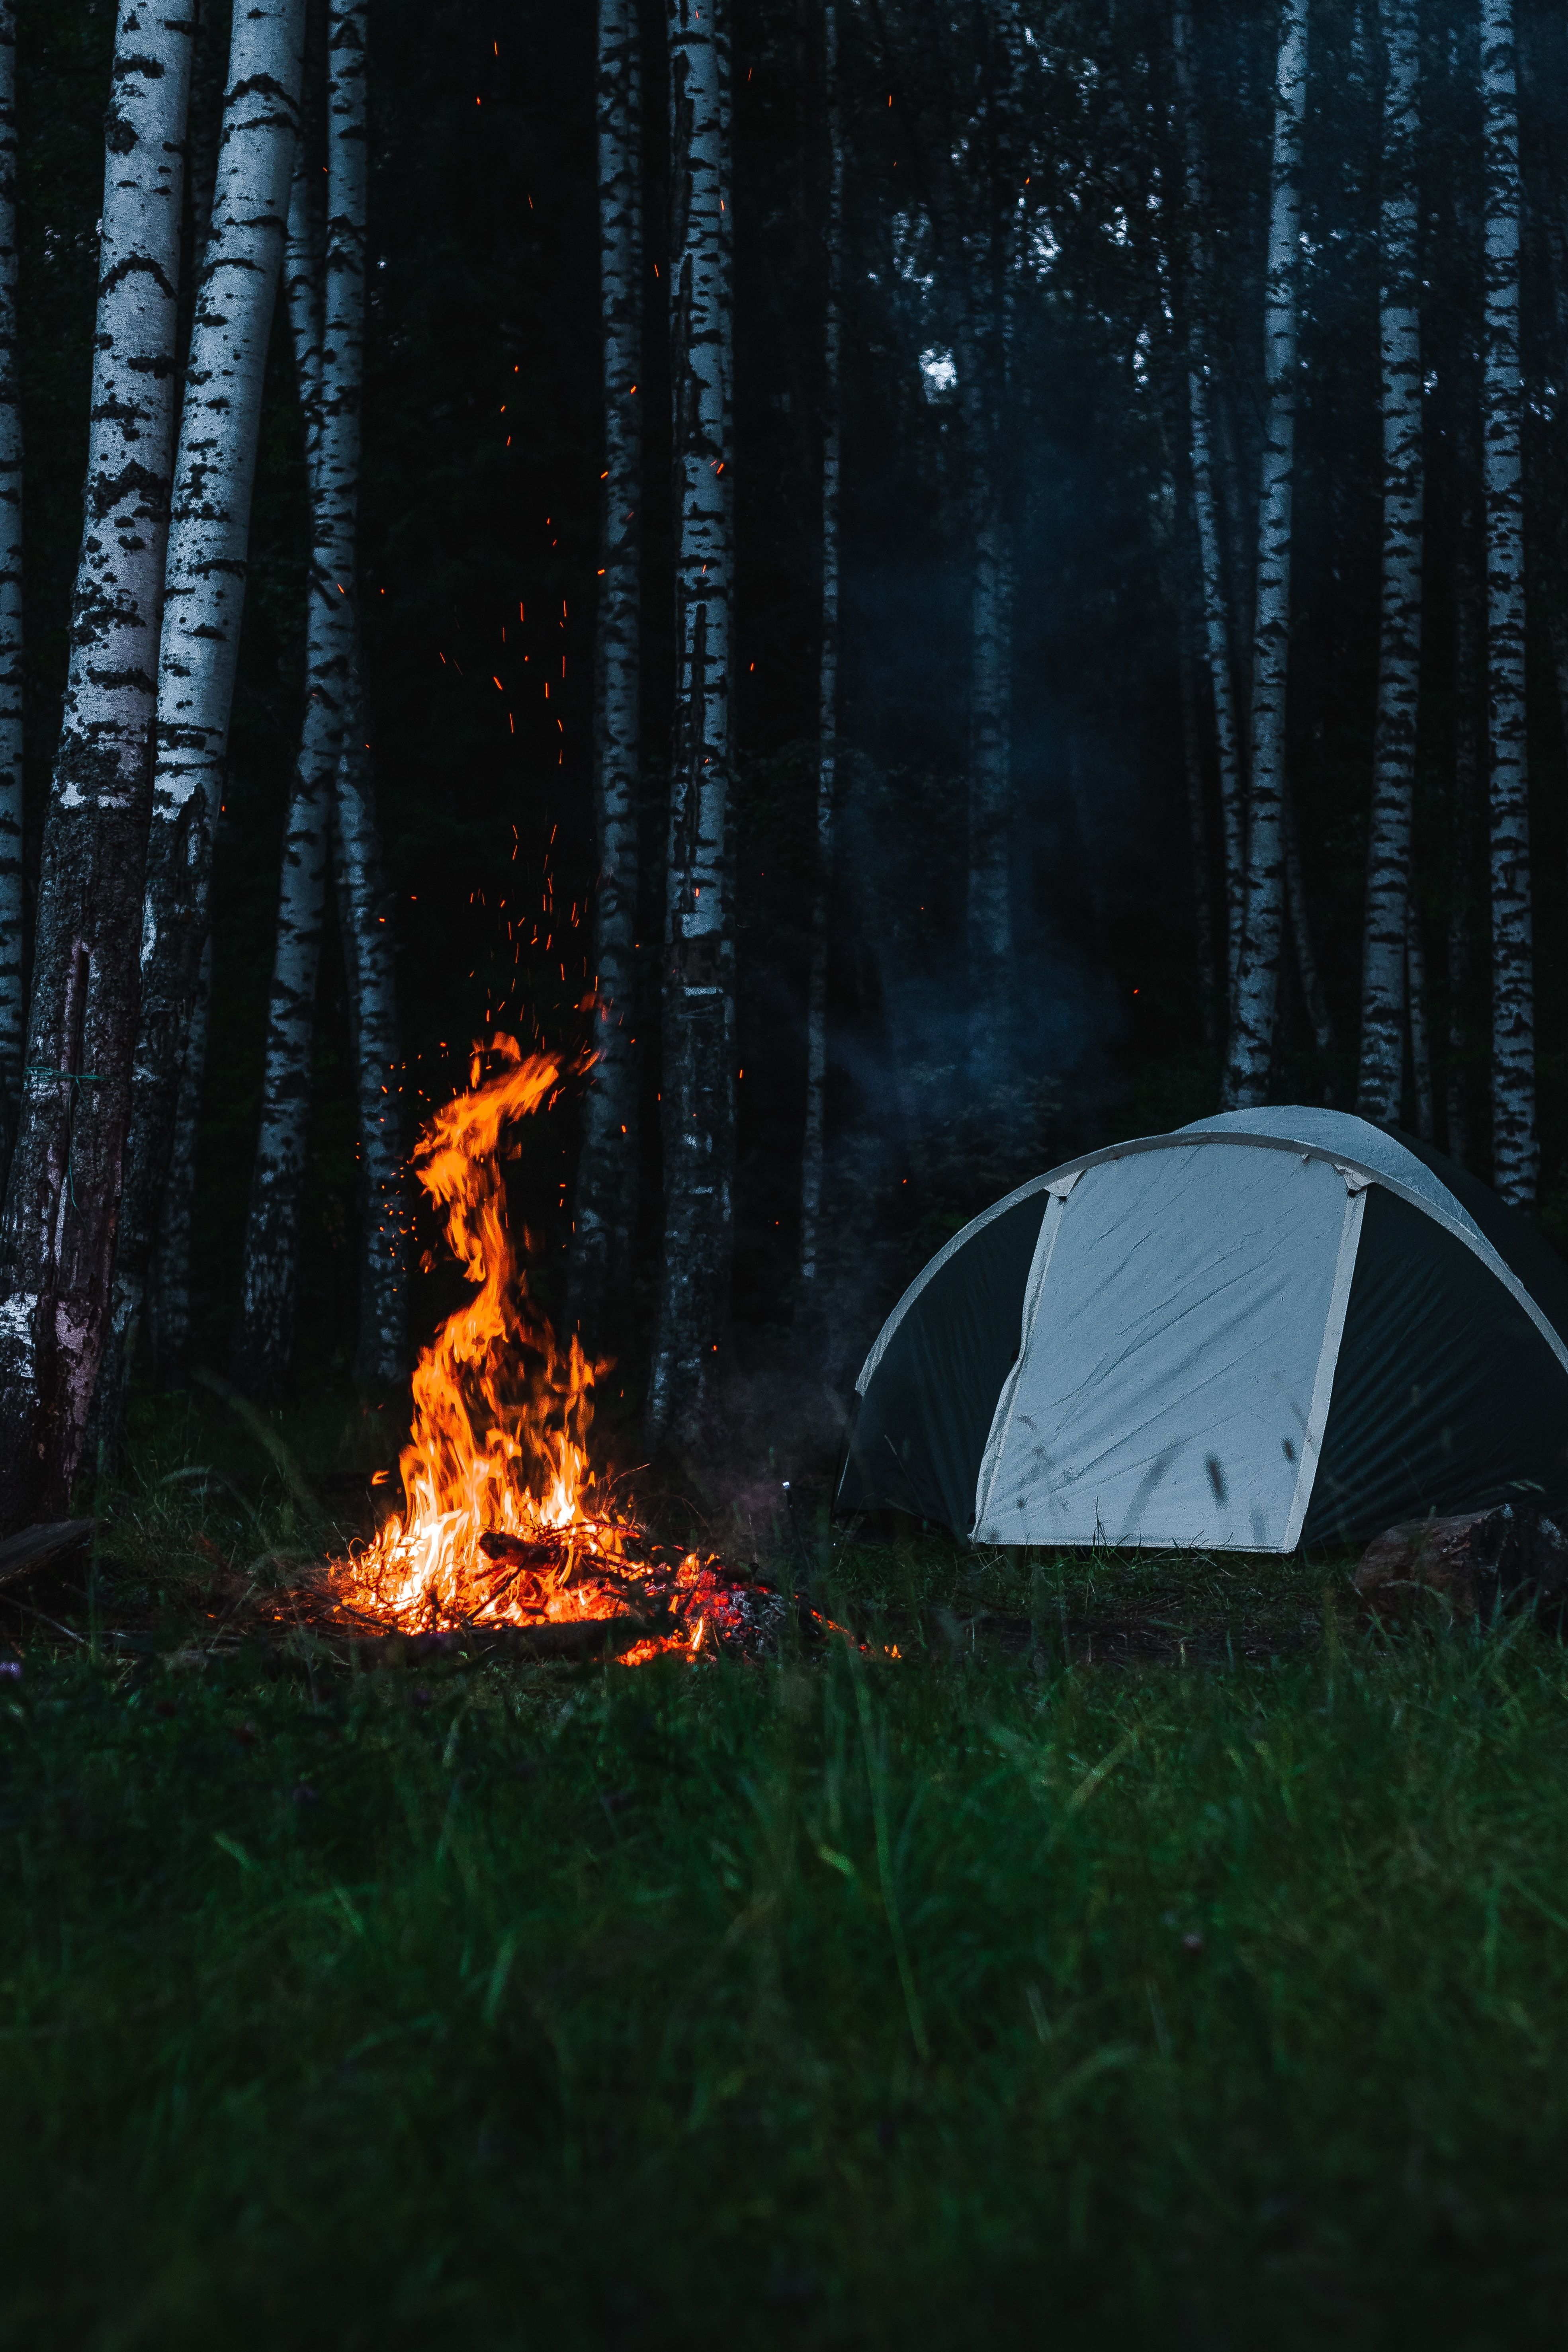 A tent is pitched next to a campfire in the woods. - Camping